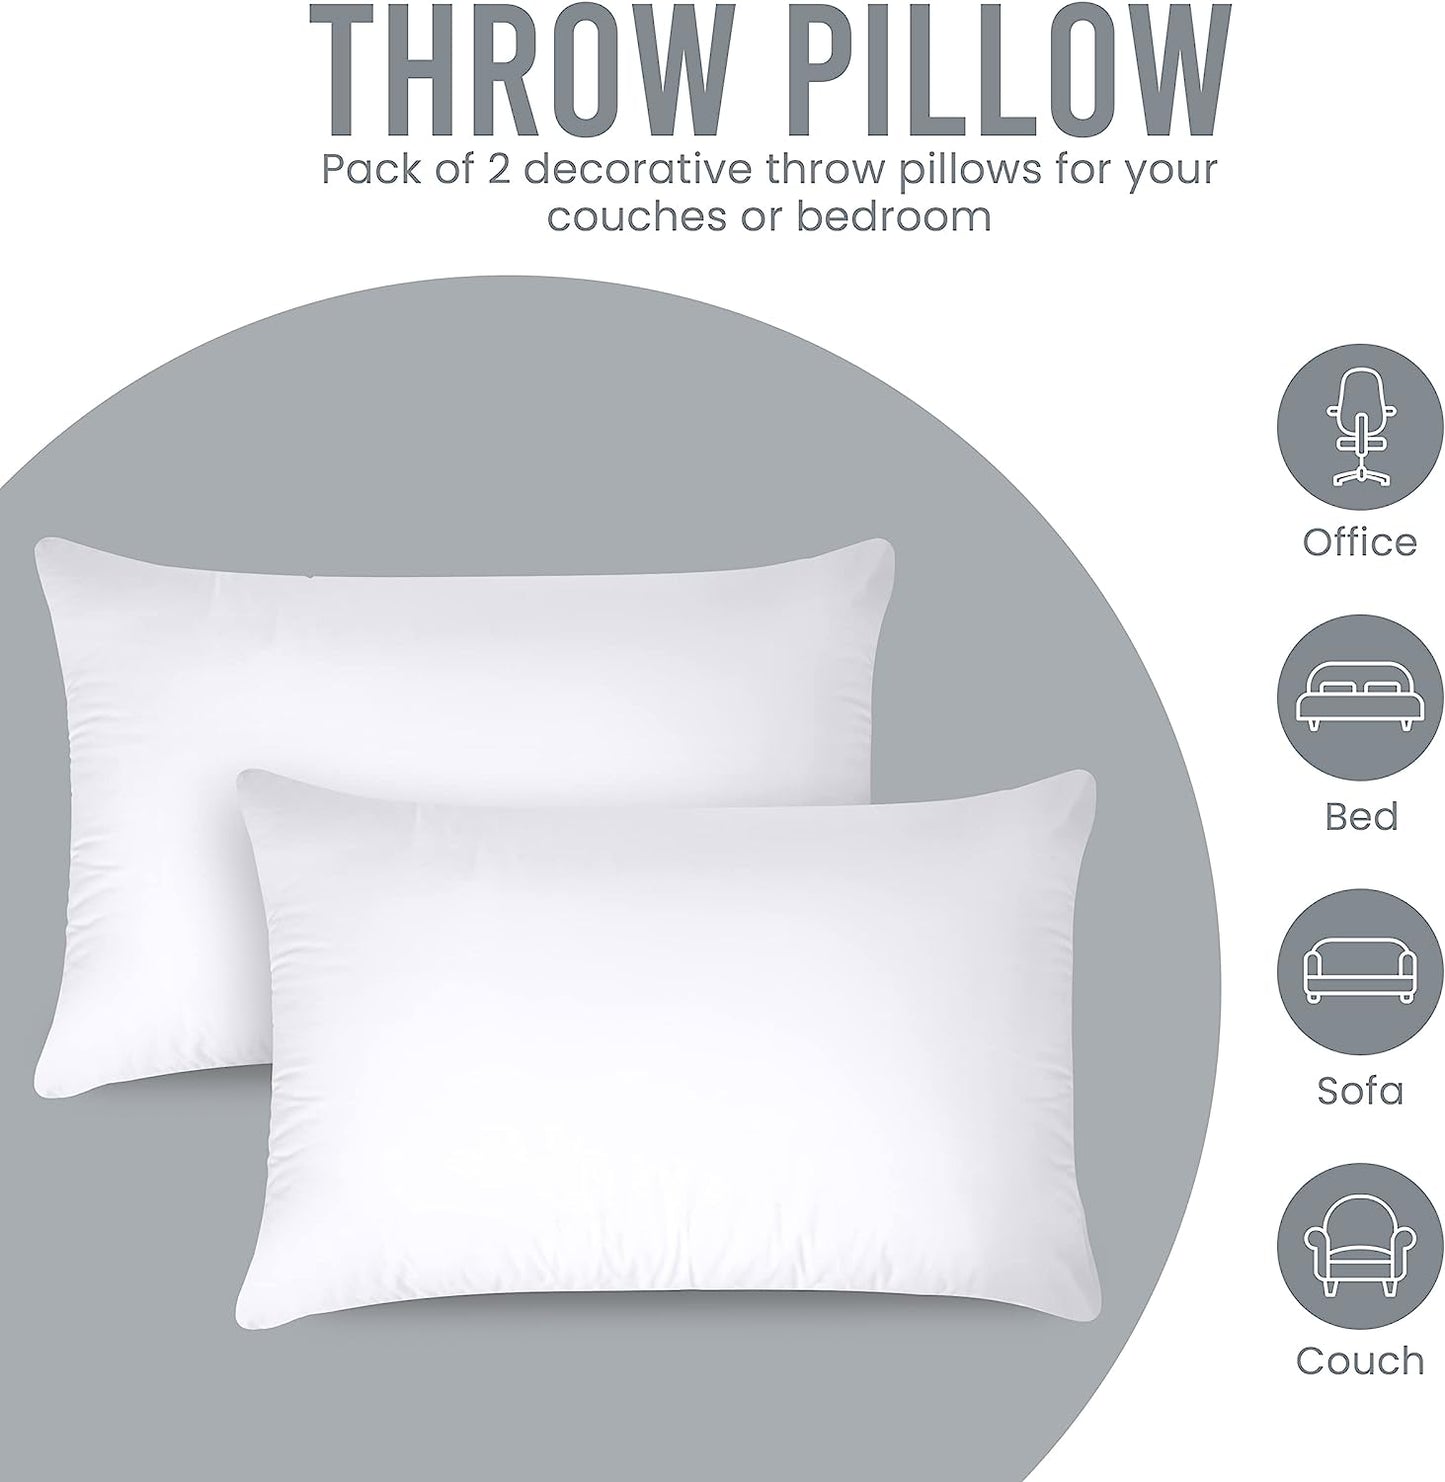 Throw Pillows Insert (Pack of 2, White) - 12 X 20 Inches Bed and Couch Pillows - Indoor Decorative Pillows